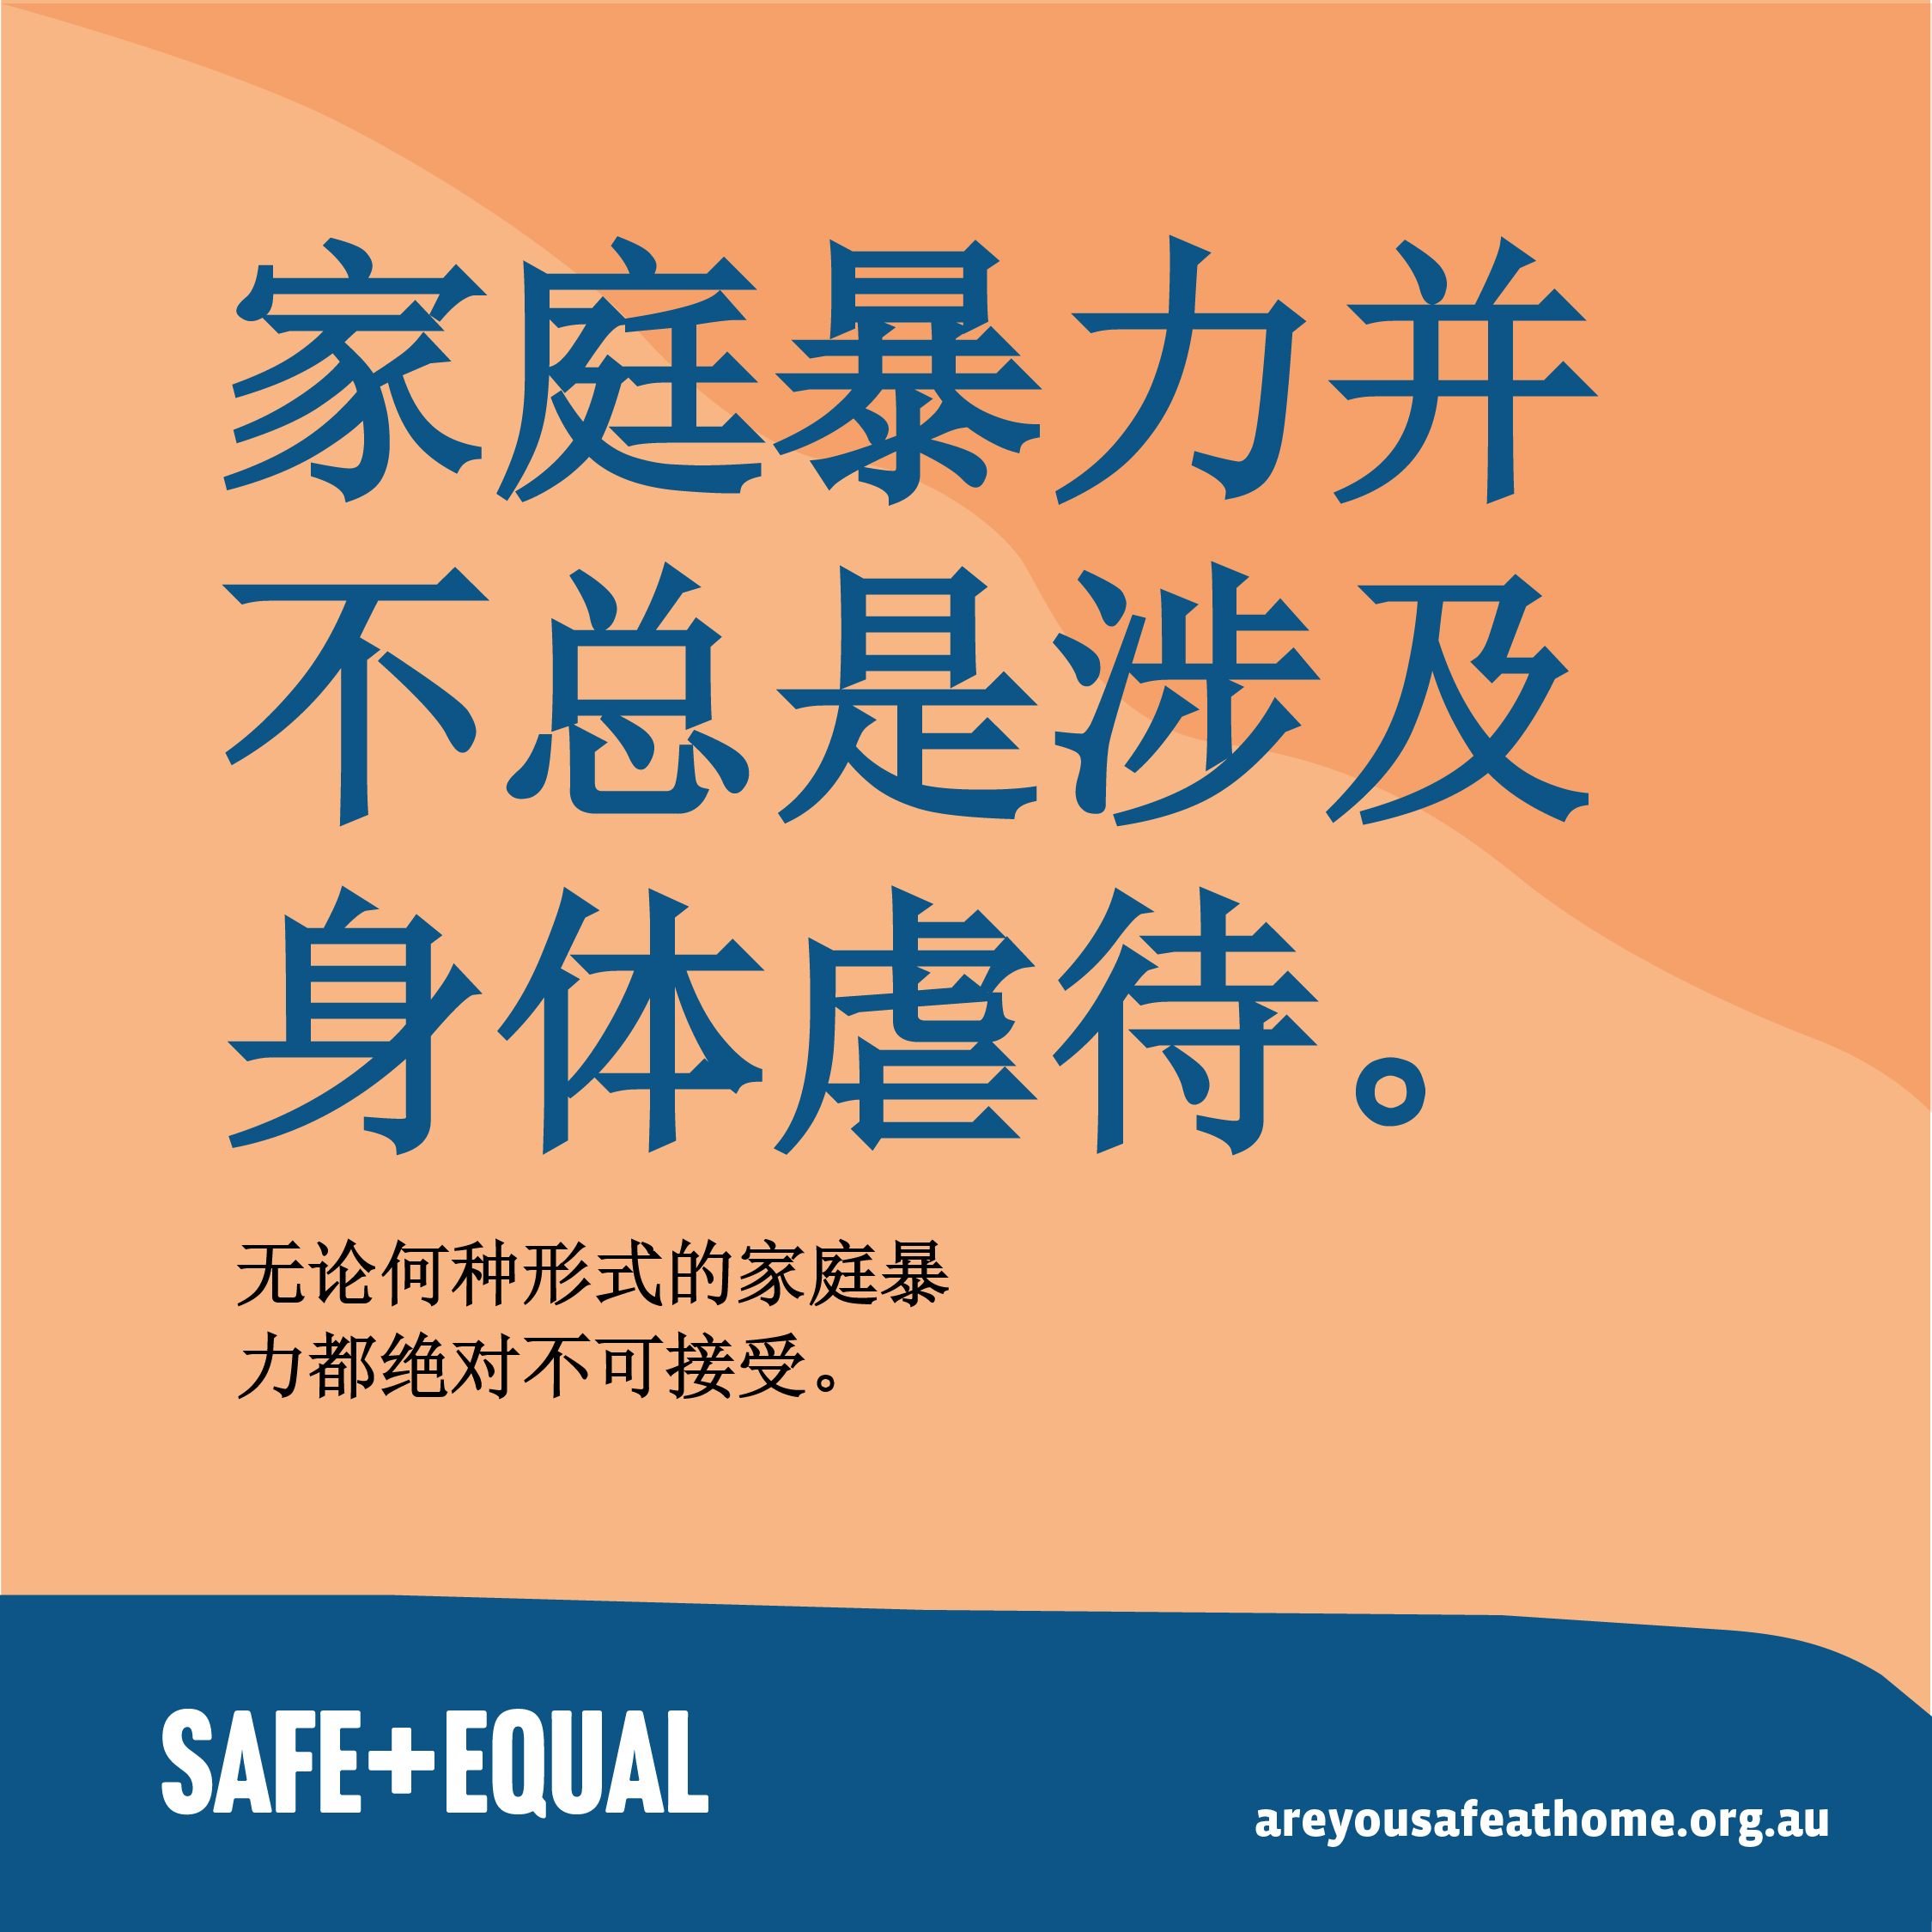 Social media tile for Are you safe at home translated into Simplified Chinese